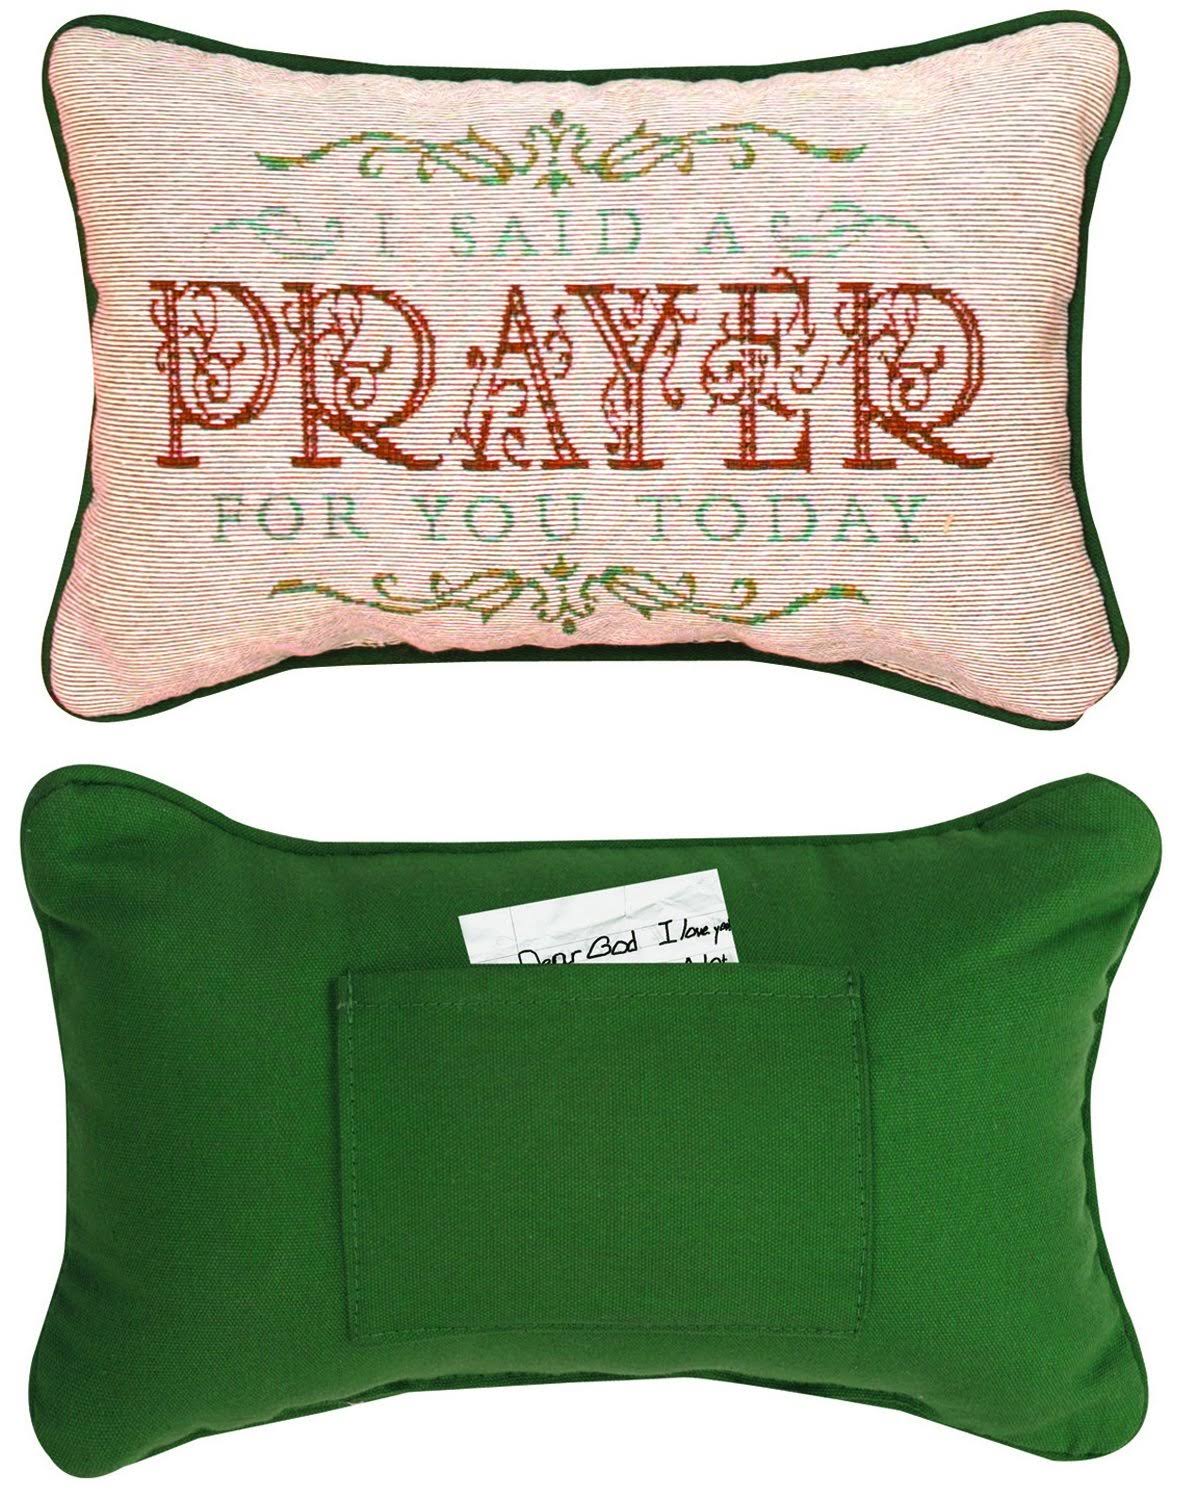 Weavers Manual Woodworkers 'I Said a Prayer for You Today' Decorative Throw Pillow, Multi, Size Specialty